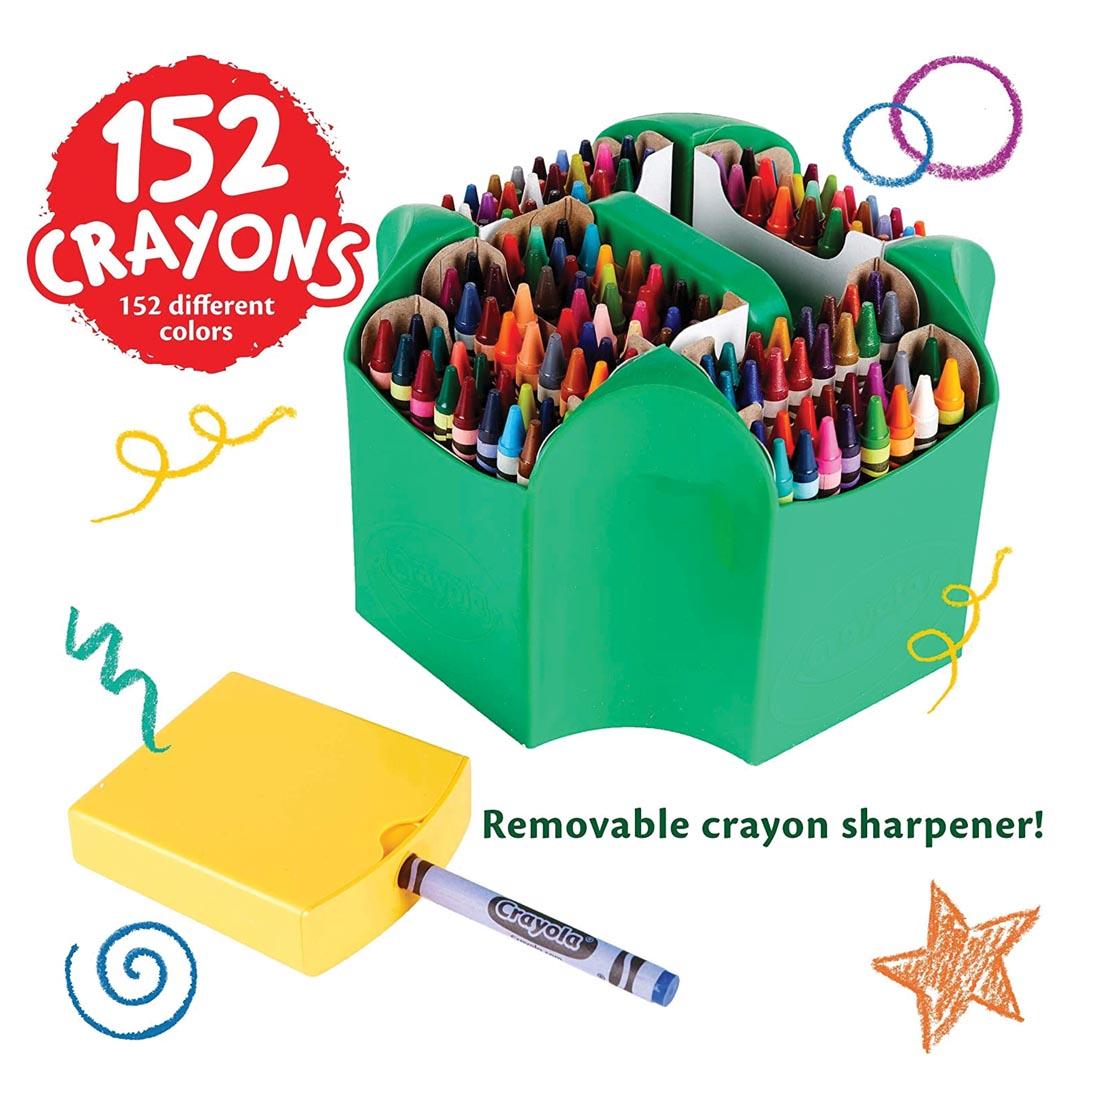 Crayola Ultimate Crayon Collection shown with removable crayon sharpener in use